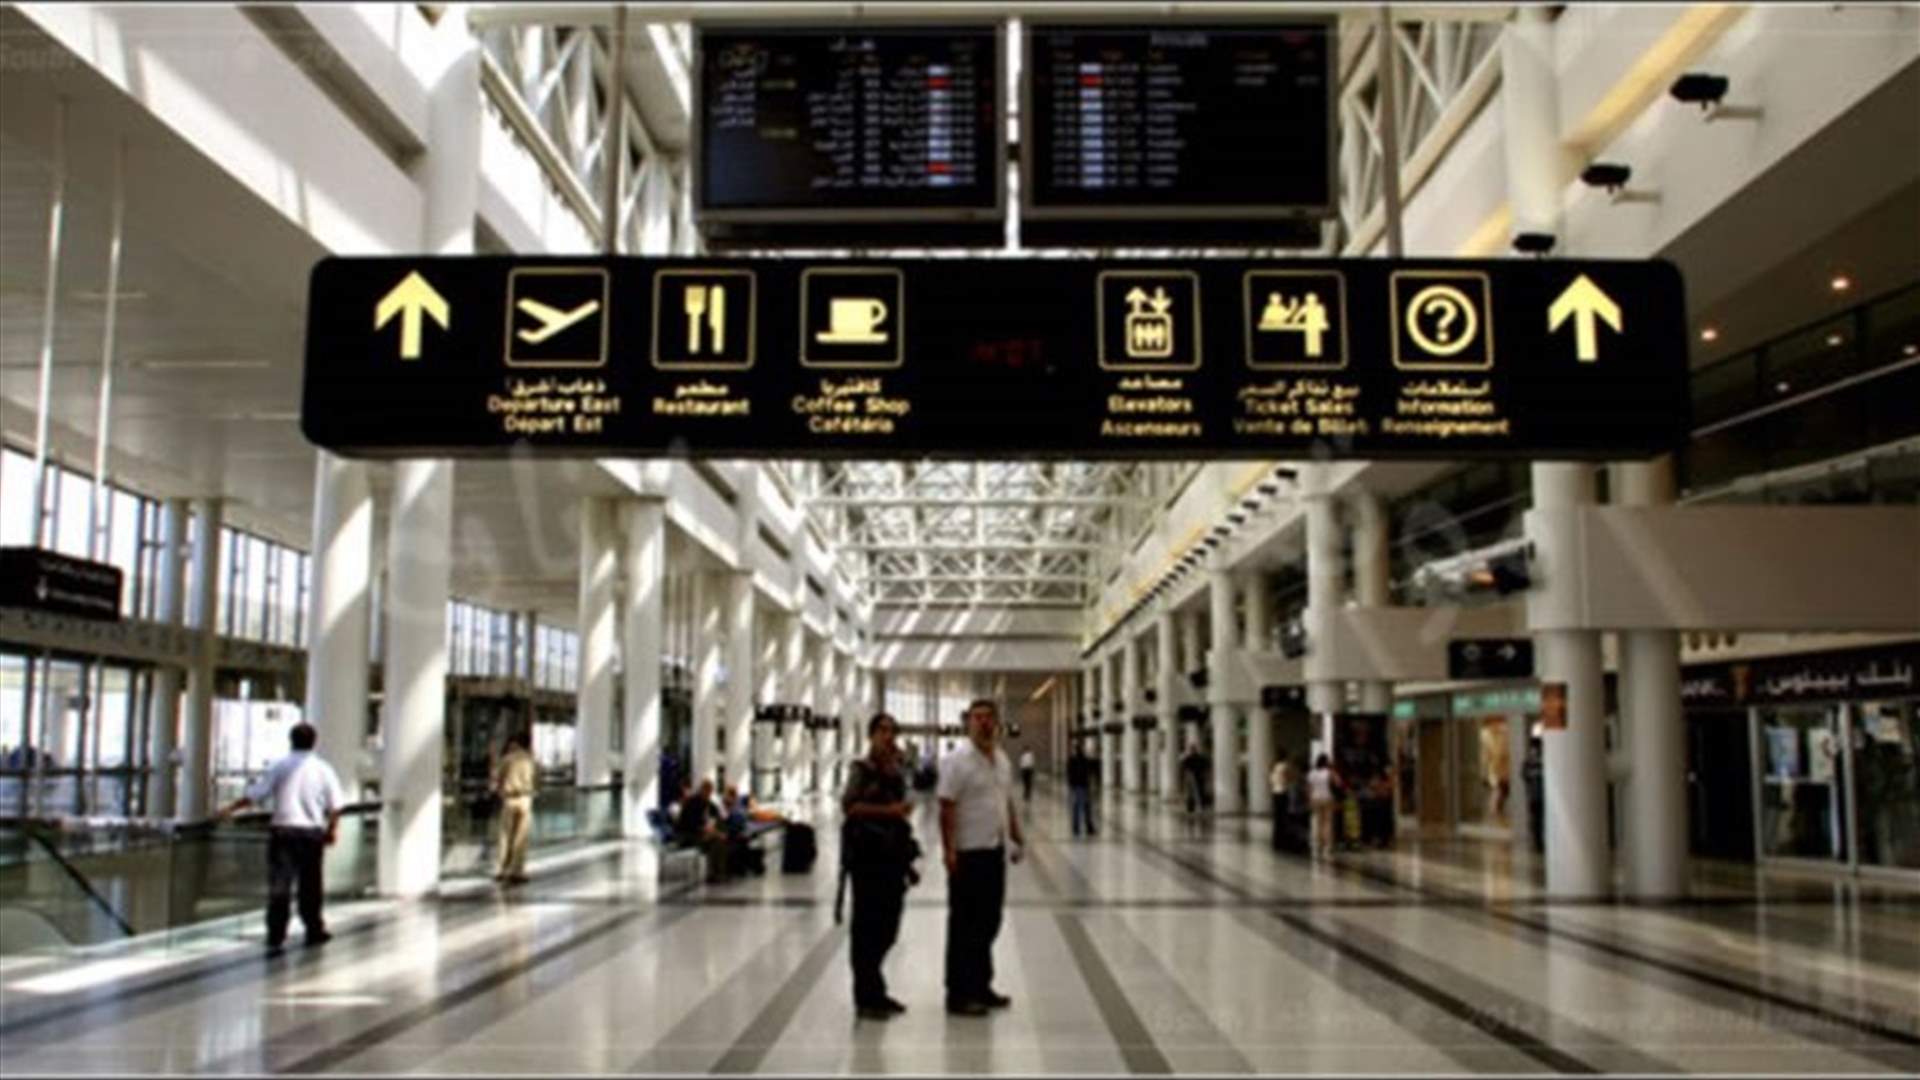 Head of a Department at Beirut’s Airport arrested on embezzlement charges